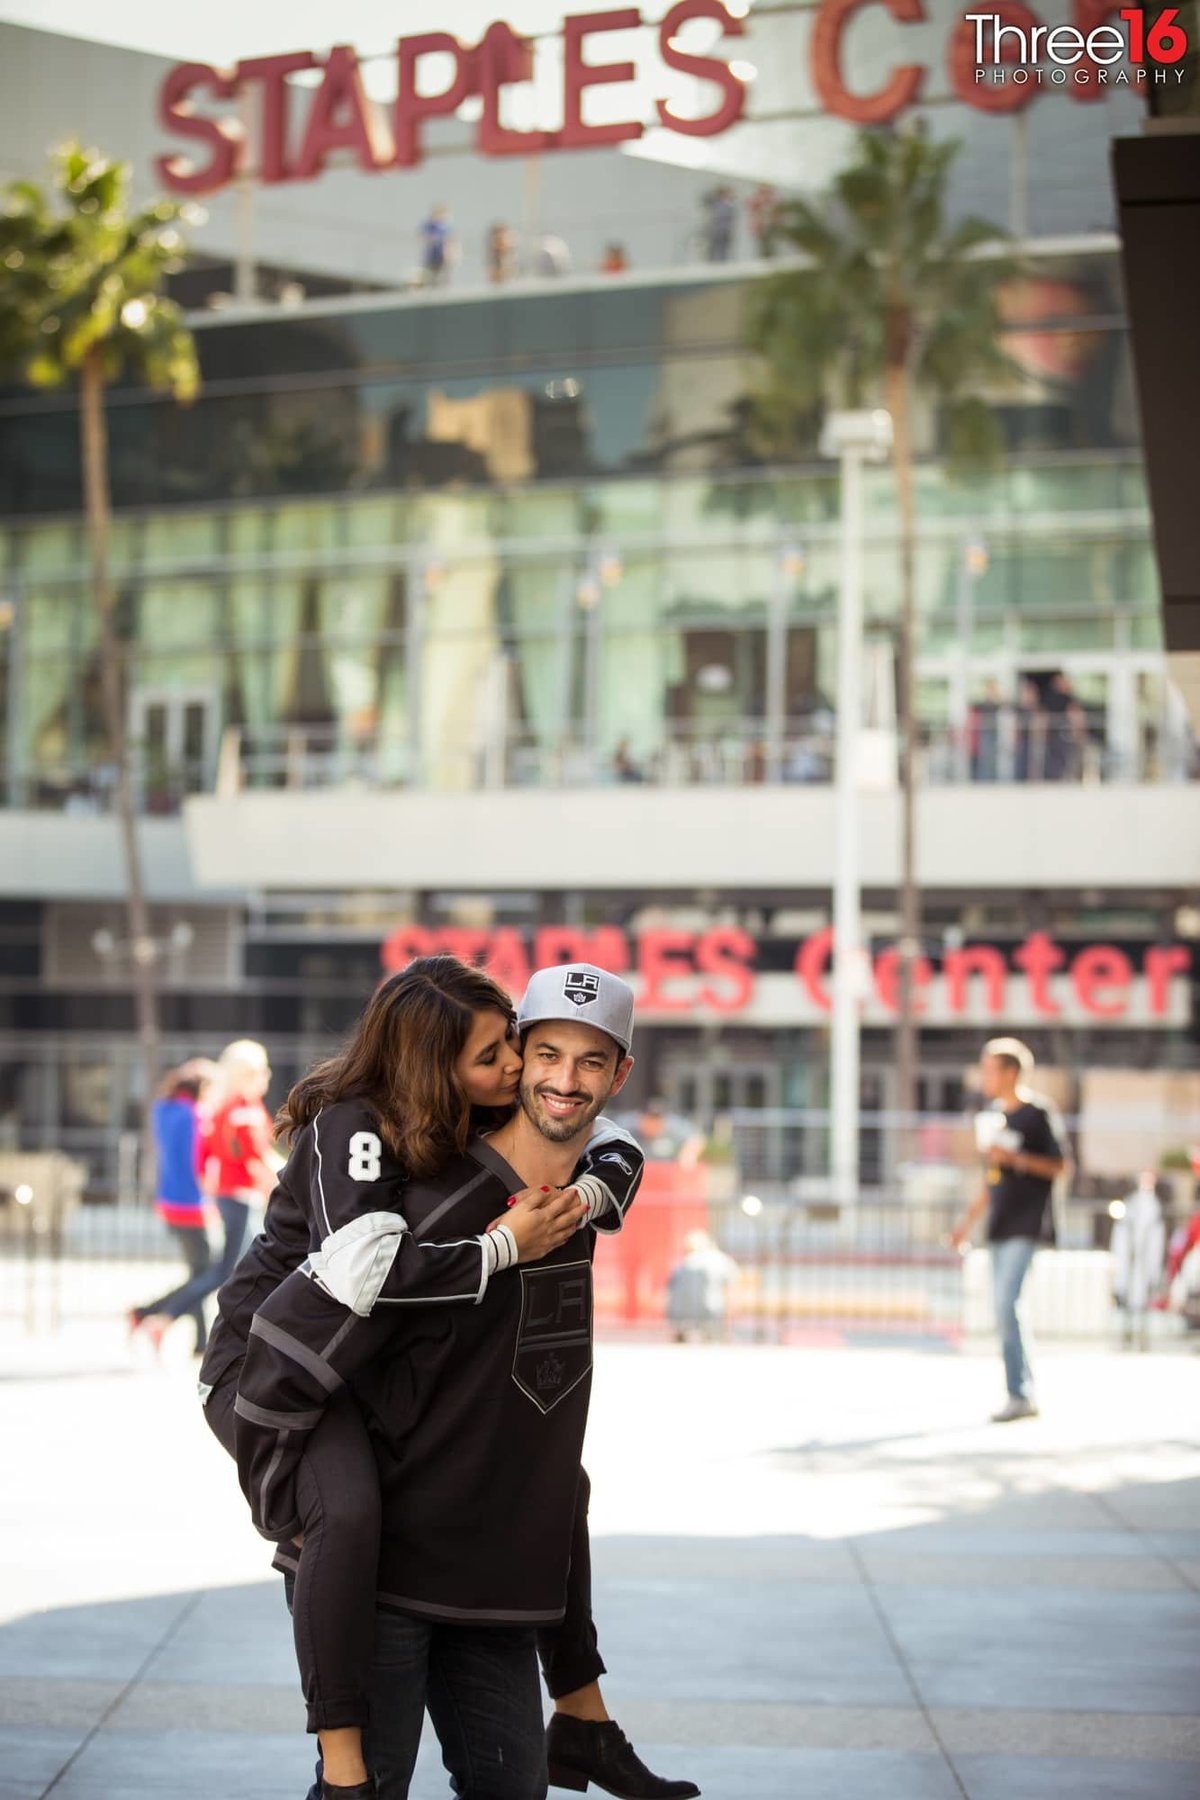 Staples Center Engagement Photos Los Angeles County Weddings Professional Photography